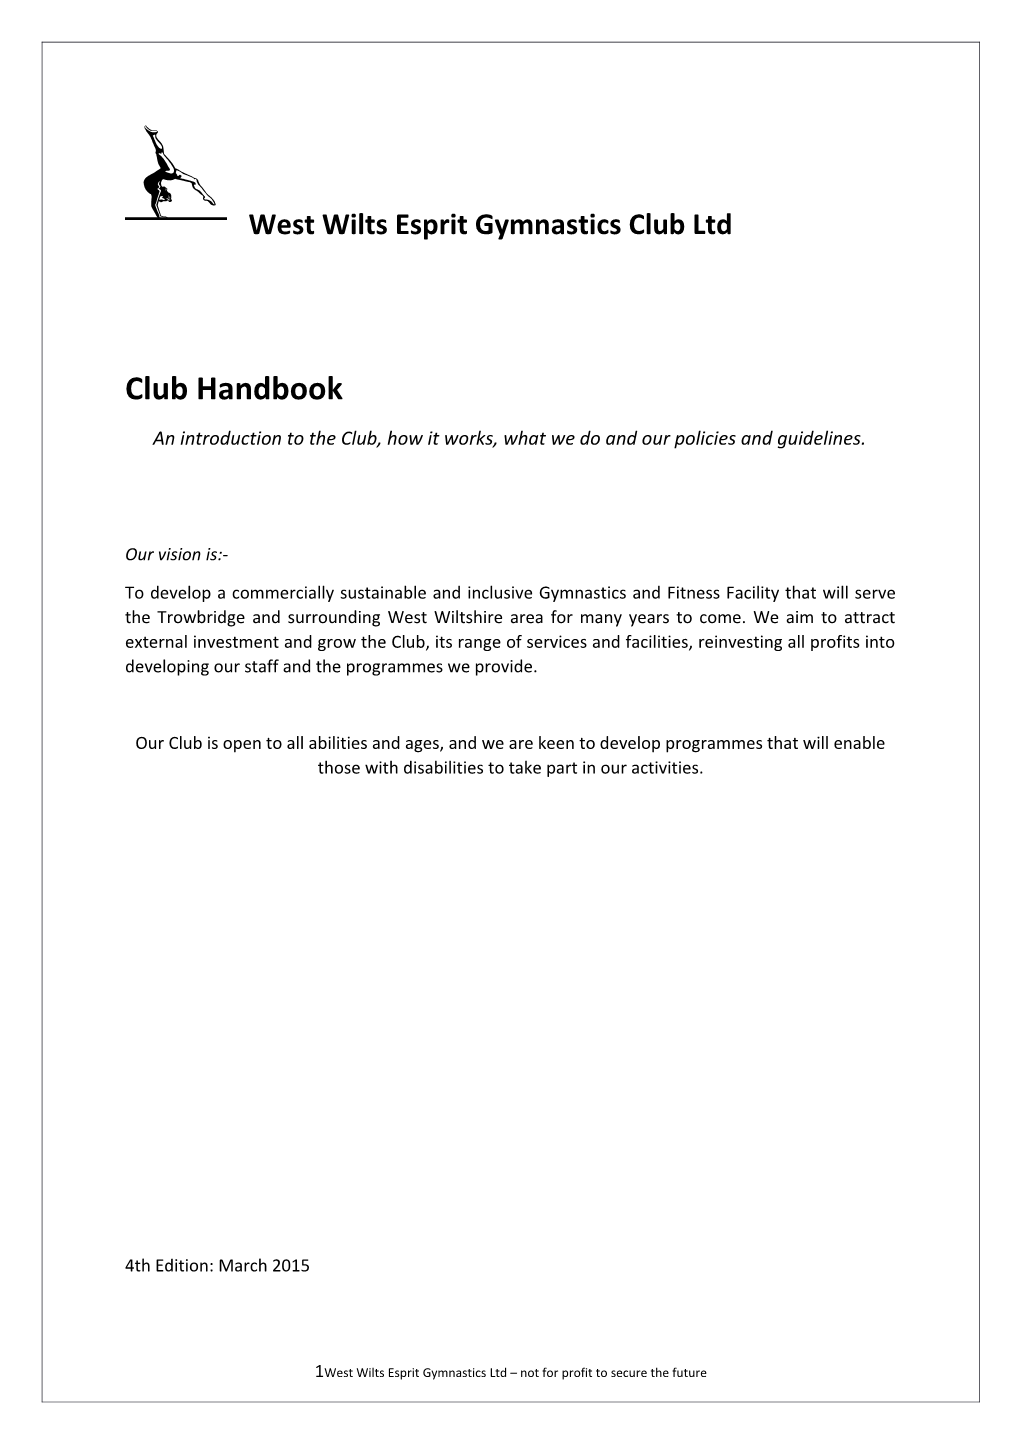 An Introduction to the Club, How It Works, What We Do and Our Policies and Guidelines